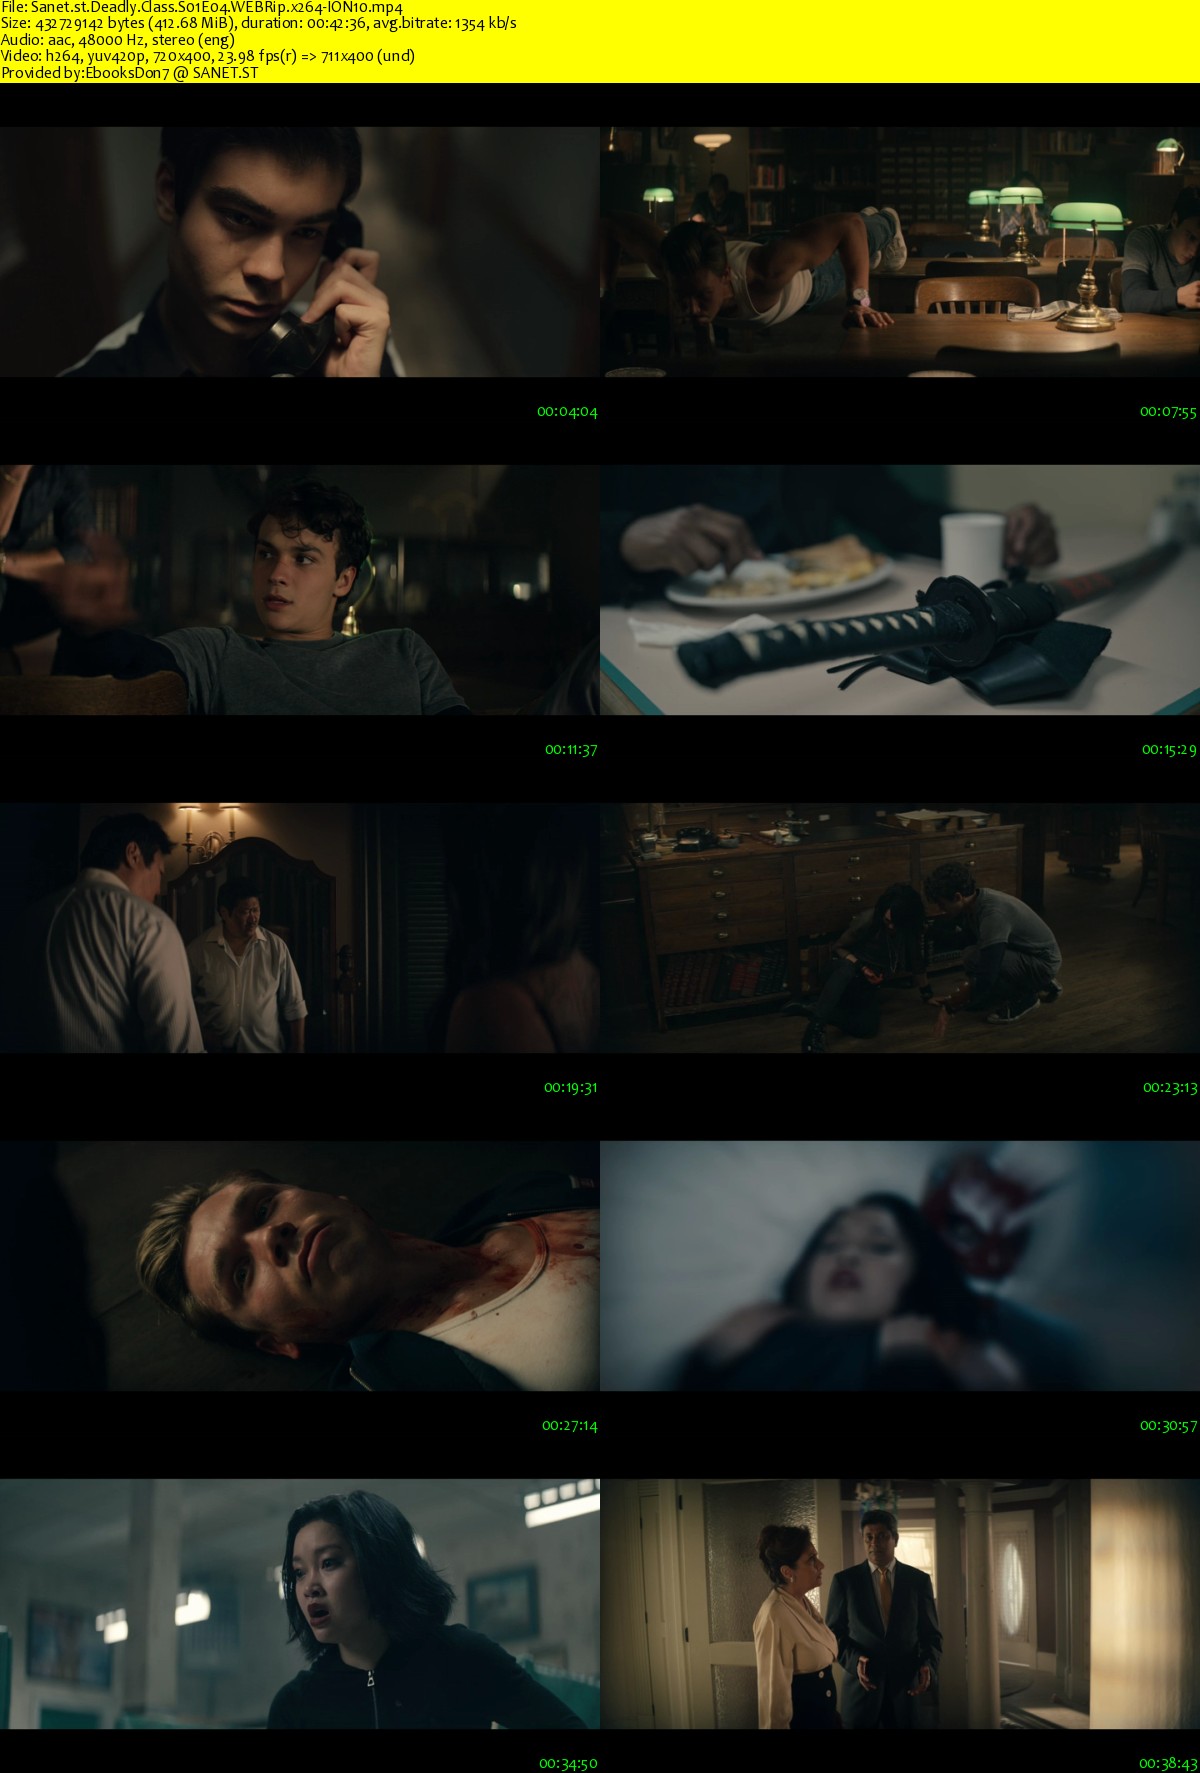 deadly class s01 e10 download